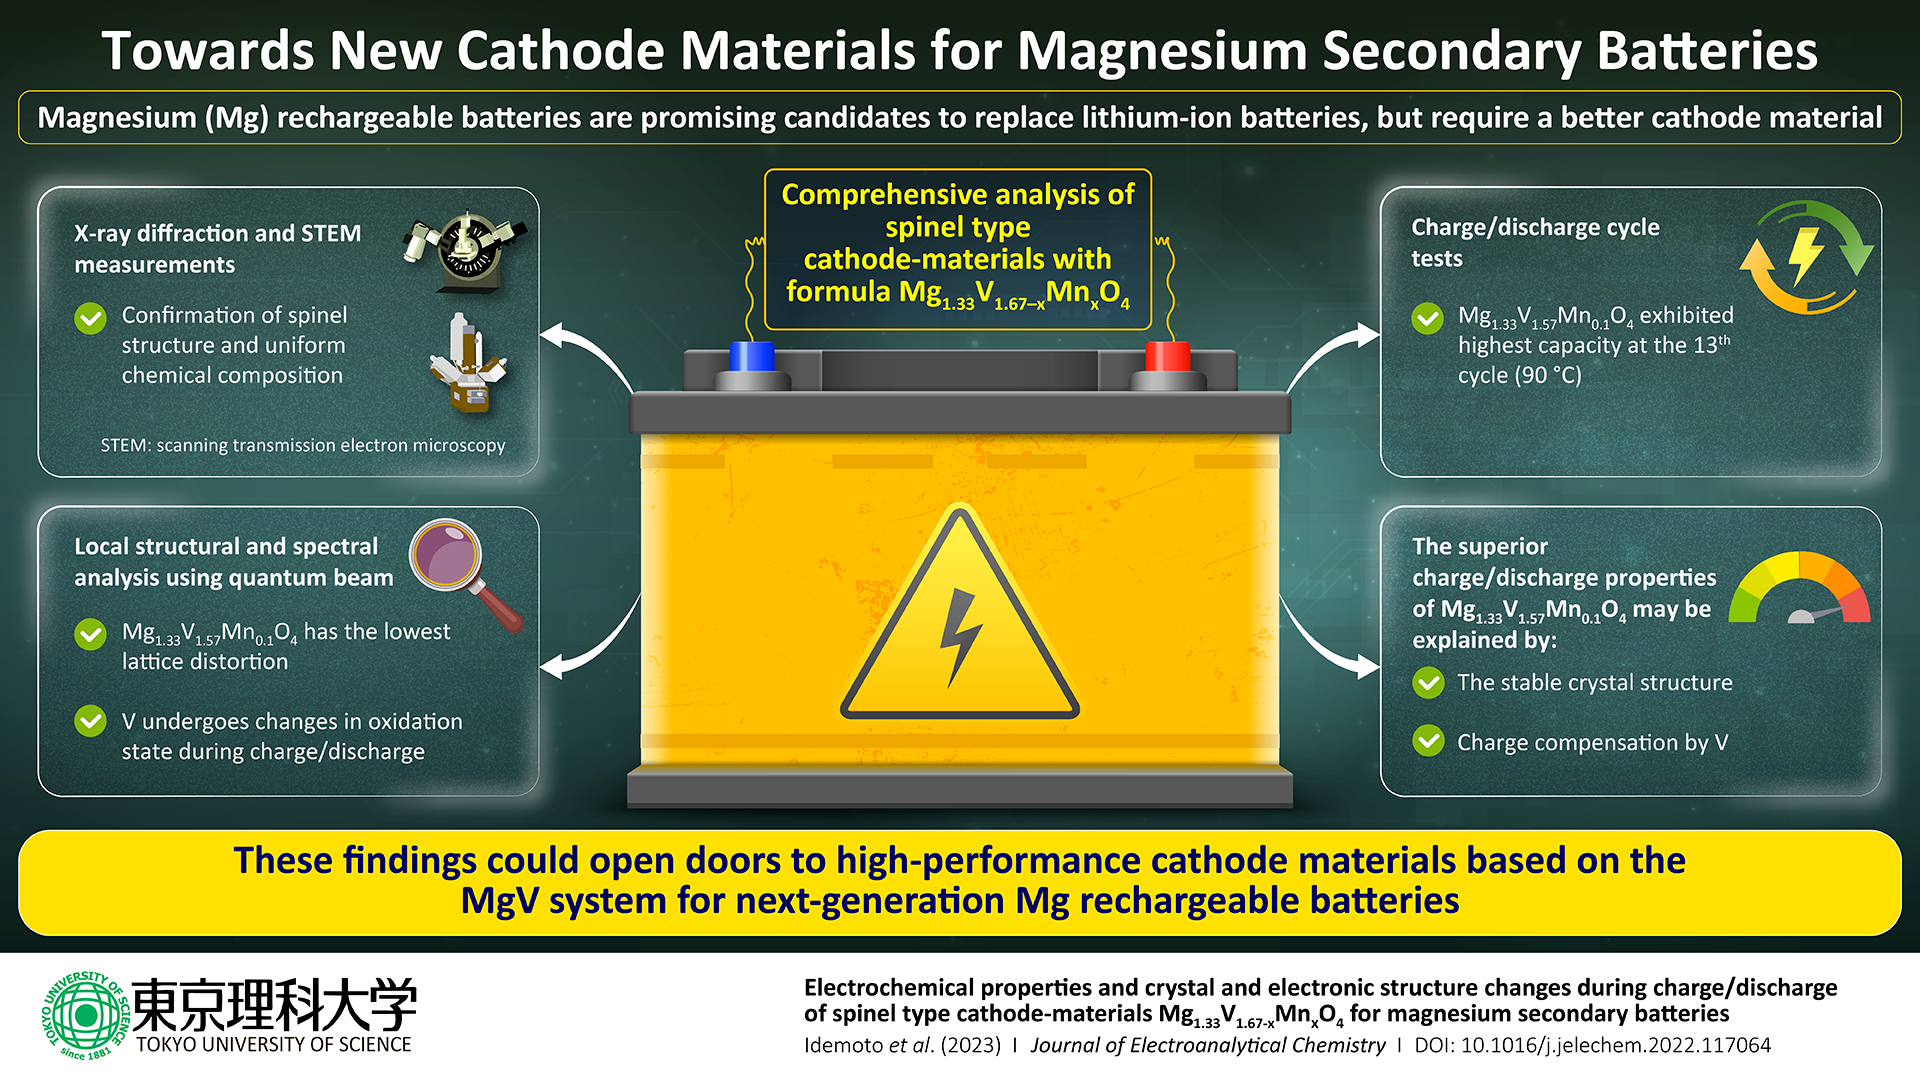 Improved Cyclability and High Battery Capacity From New Cathode